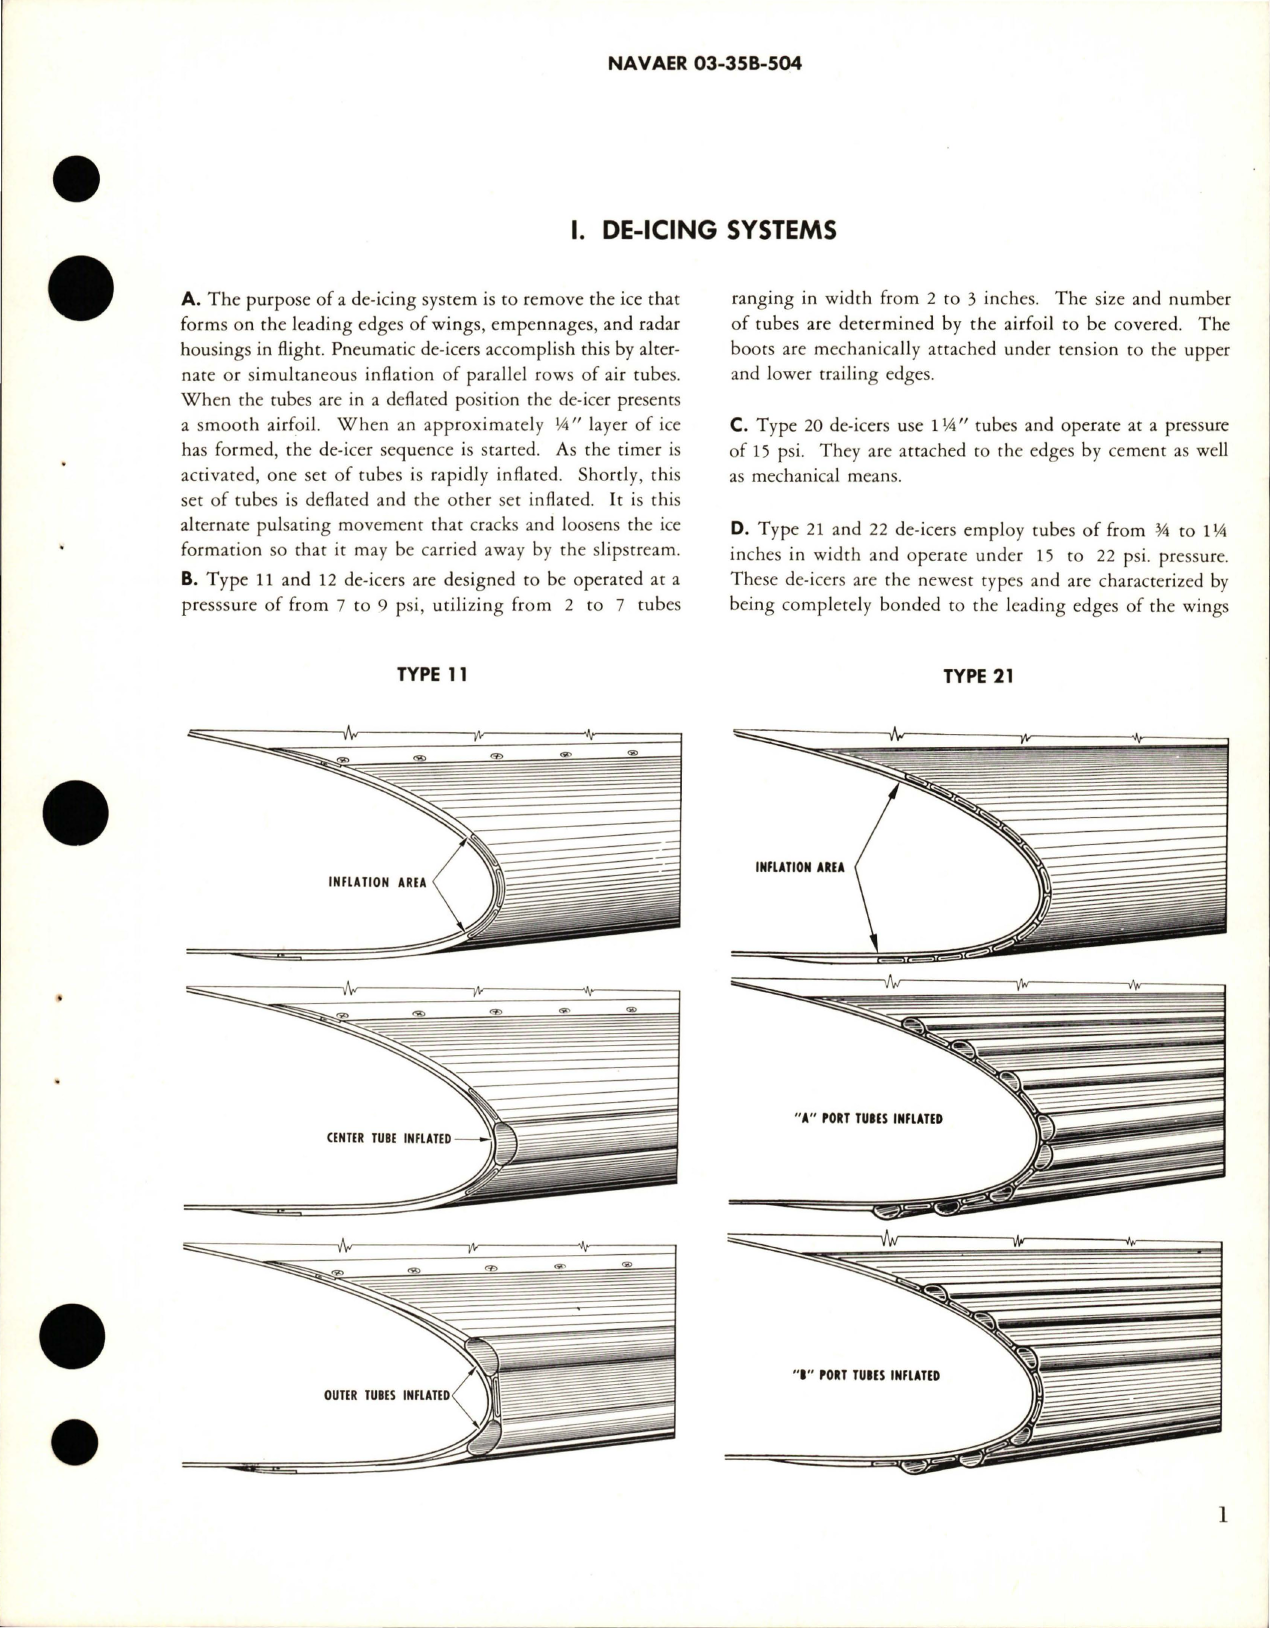 Sample page 7 from AirCorps Library document: Instruction Manual for De-Icer Care & Maintenance, Installation, Inspection, and Repairs